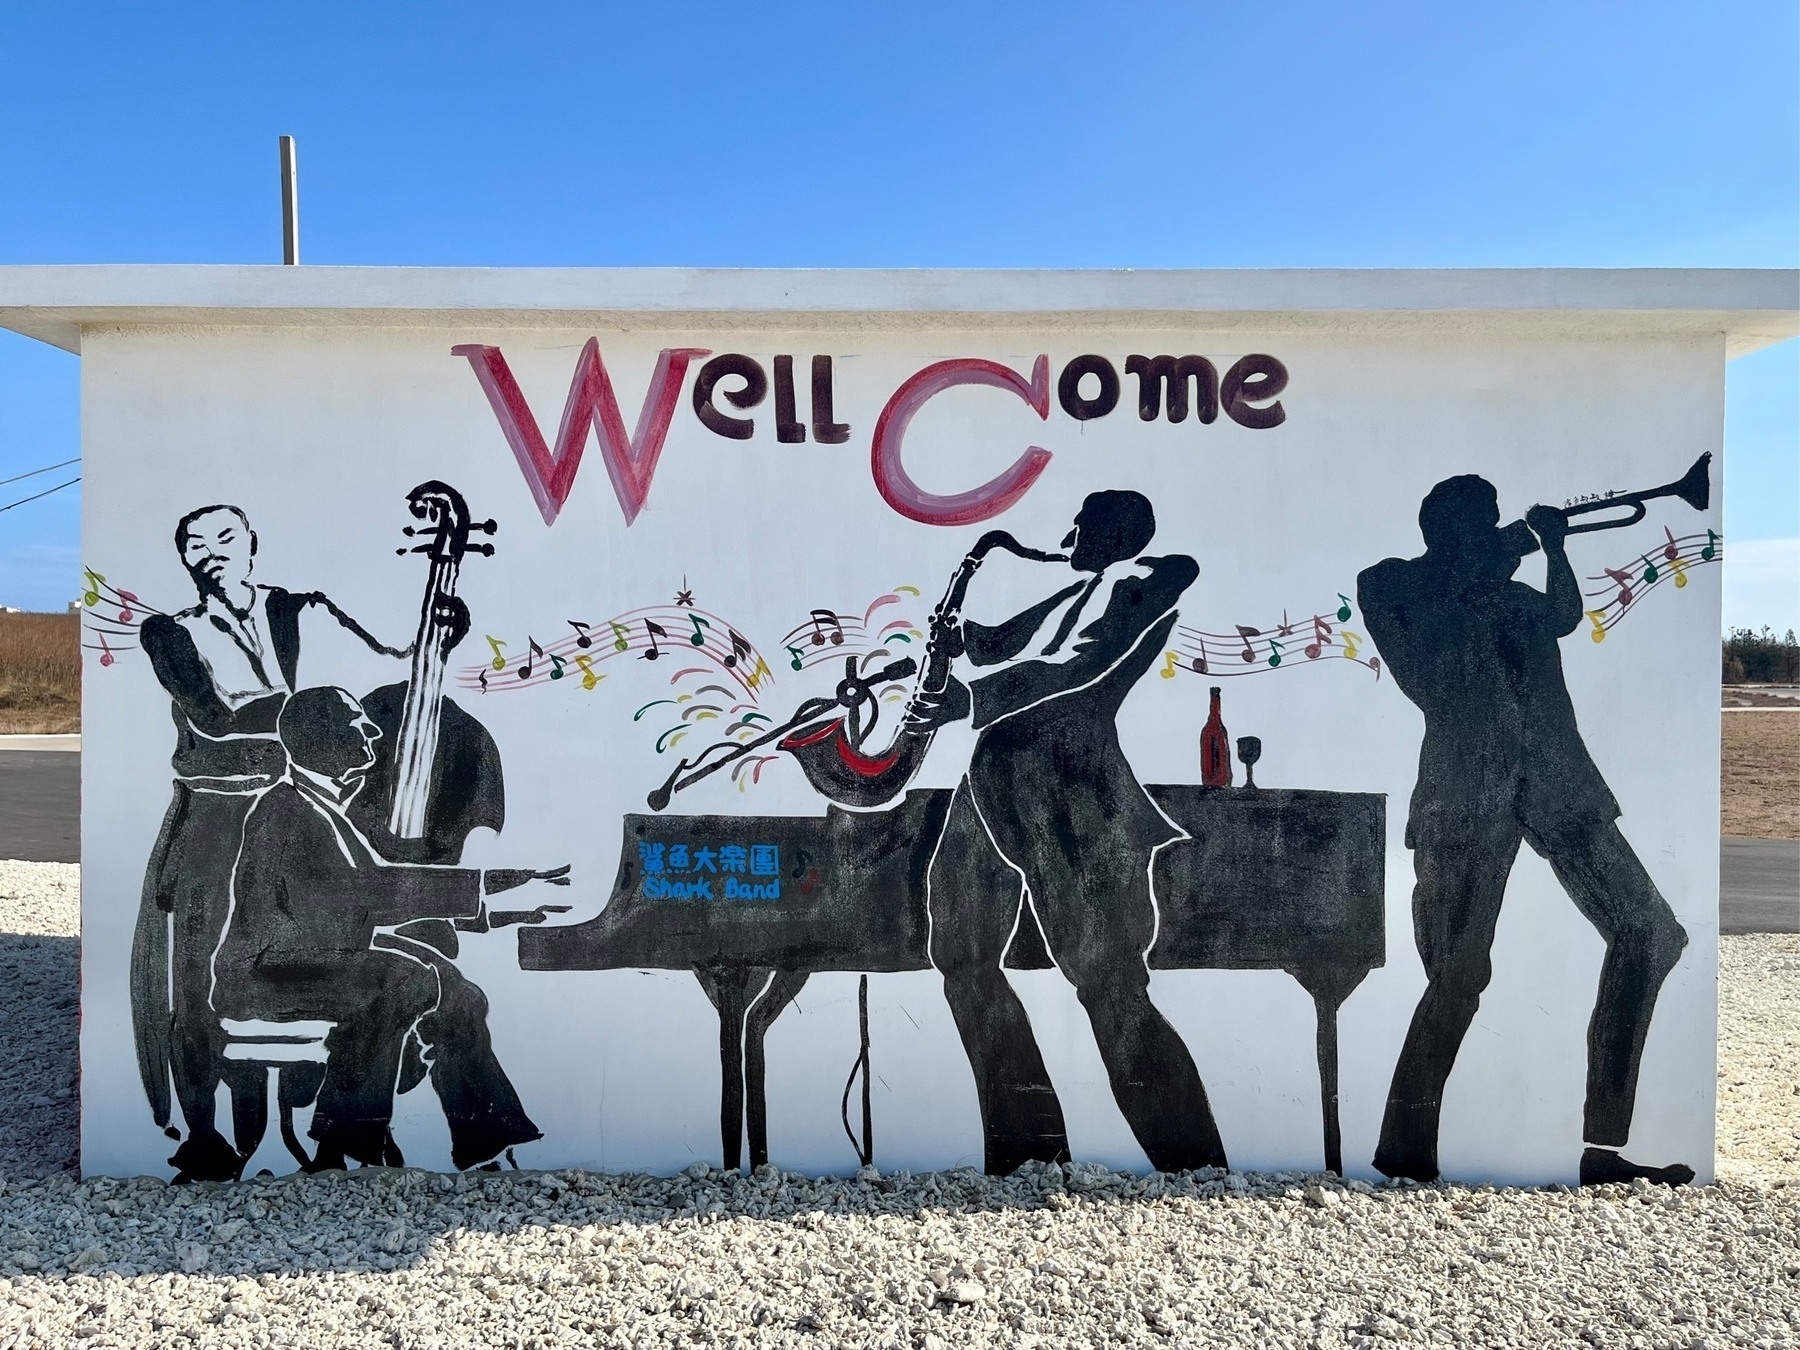 Mural on the side of a low beach-side building depicting a jazz band called "Shark Band", with double-bass, piano, sax, and trumpet, all painted in black, with the words "Well Come" above it